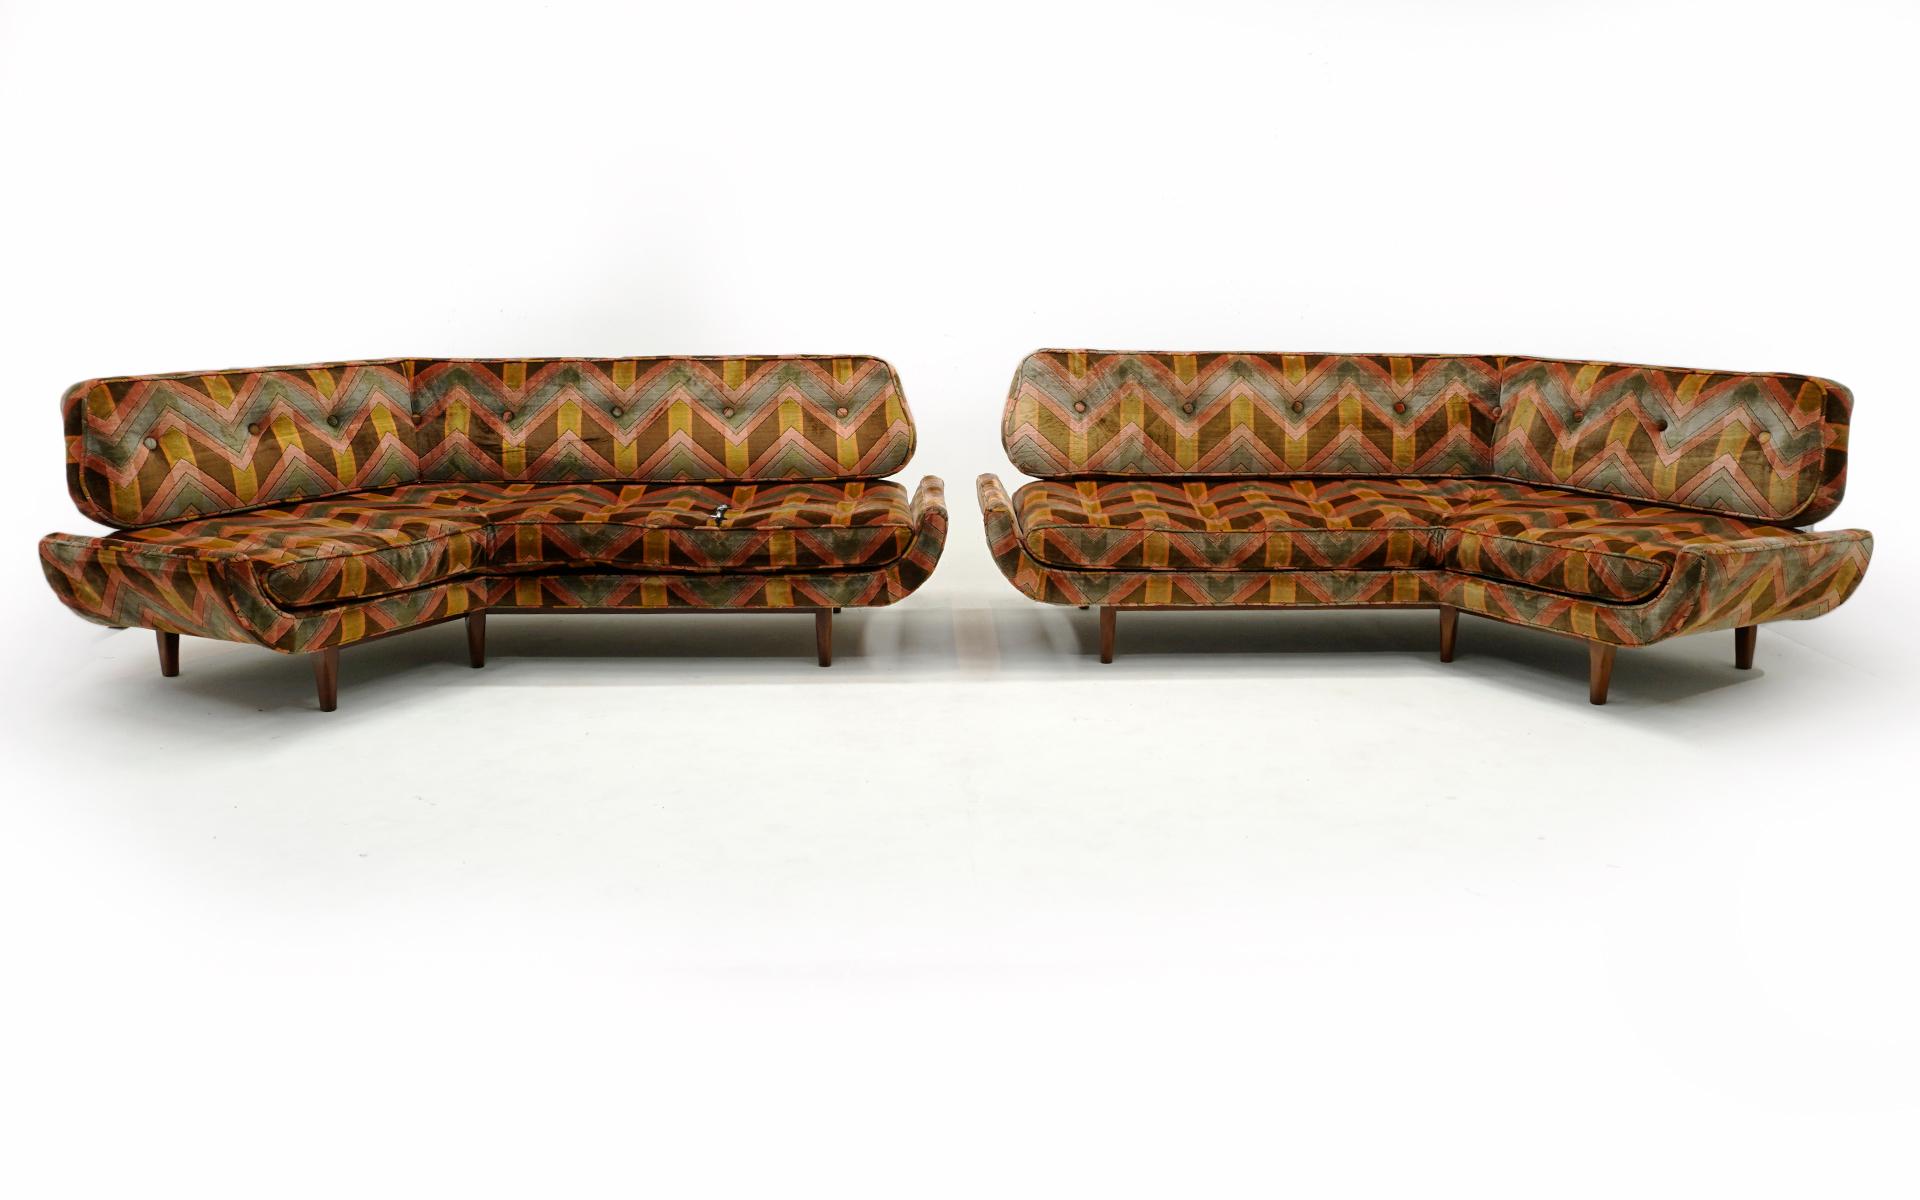 Pair of mirror image angled sofas by Dux, Sweden.  These one of a kind pieces were custom made for a residence in the 1960s,  Great mid century look and very comfortable.  When measuring from the angle point of the sofa to the ends, the shorter side